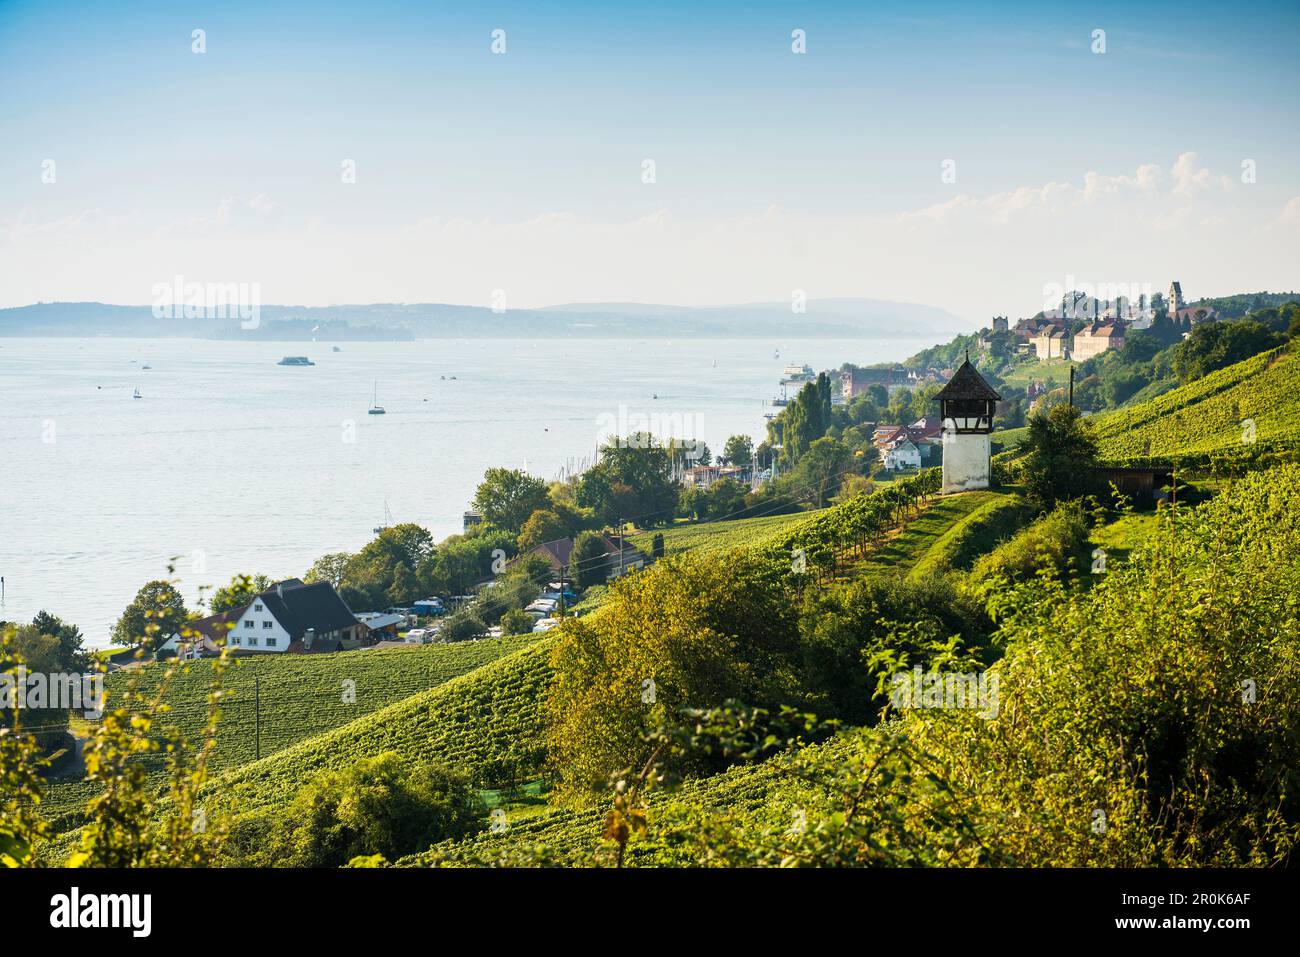 Historic Rebgut Haltnau vineyard on Lake Constance, with the town of Meersburg am Bodensee on the right, Lake Constance, Meersburg, Baden-Württemberg, Stock Photo